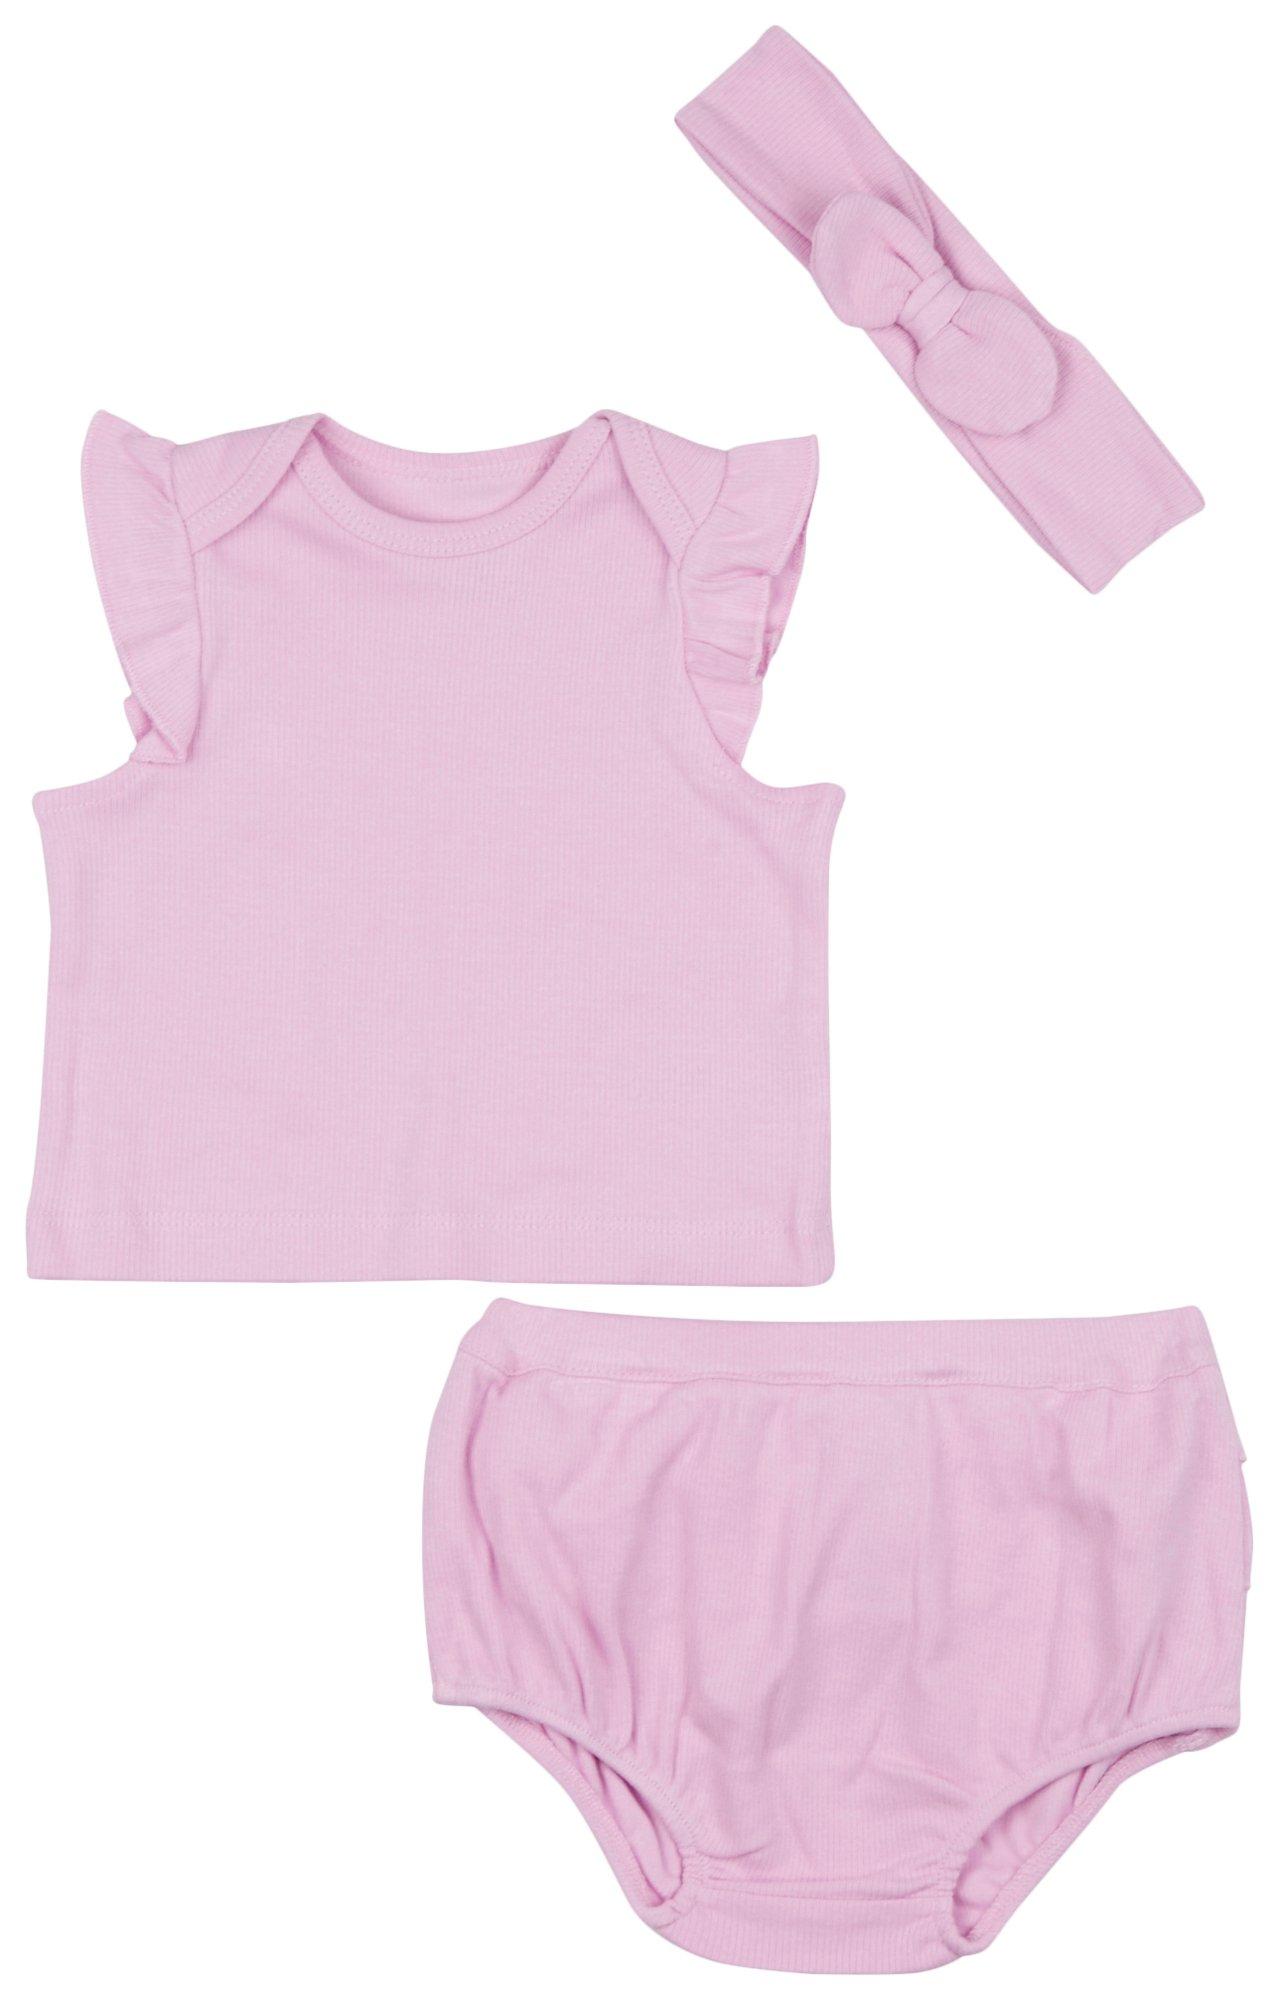 Little Me Baby Girls 3-pc. Lilac Knit Top Bloomer Set